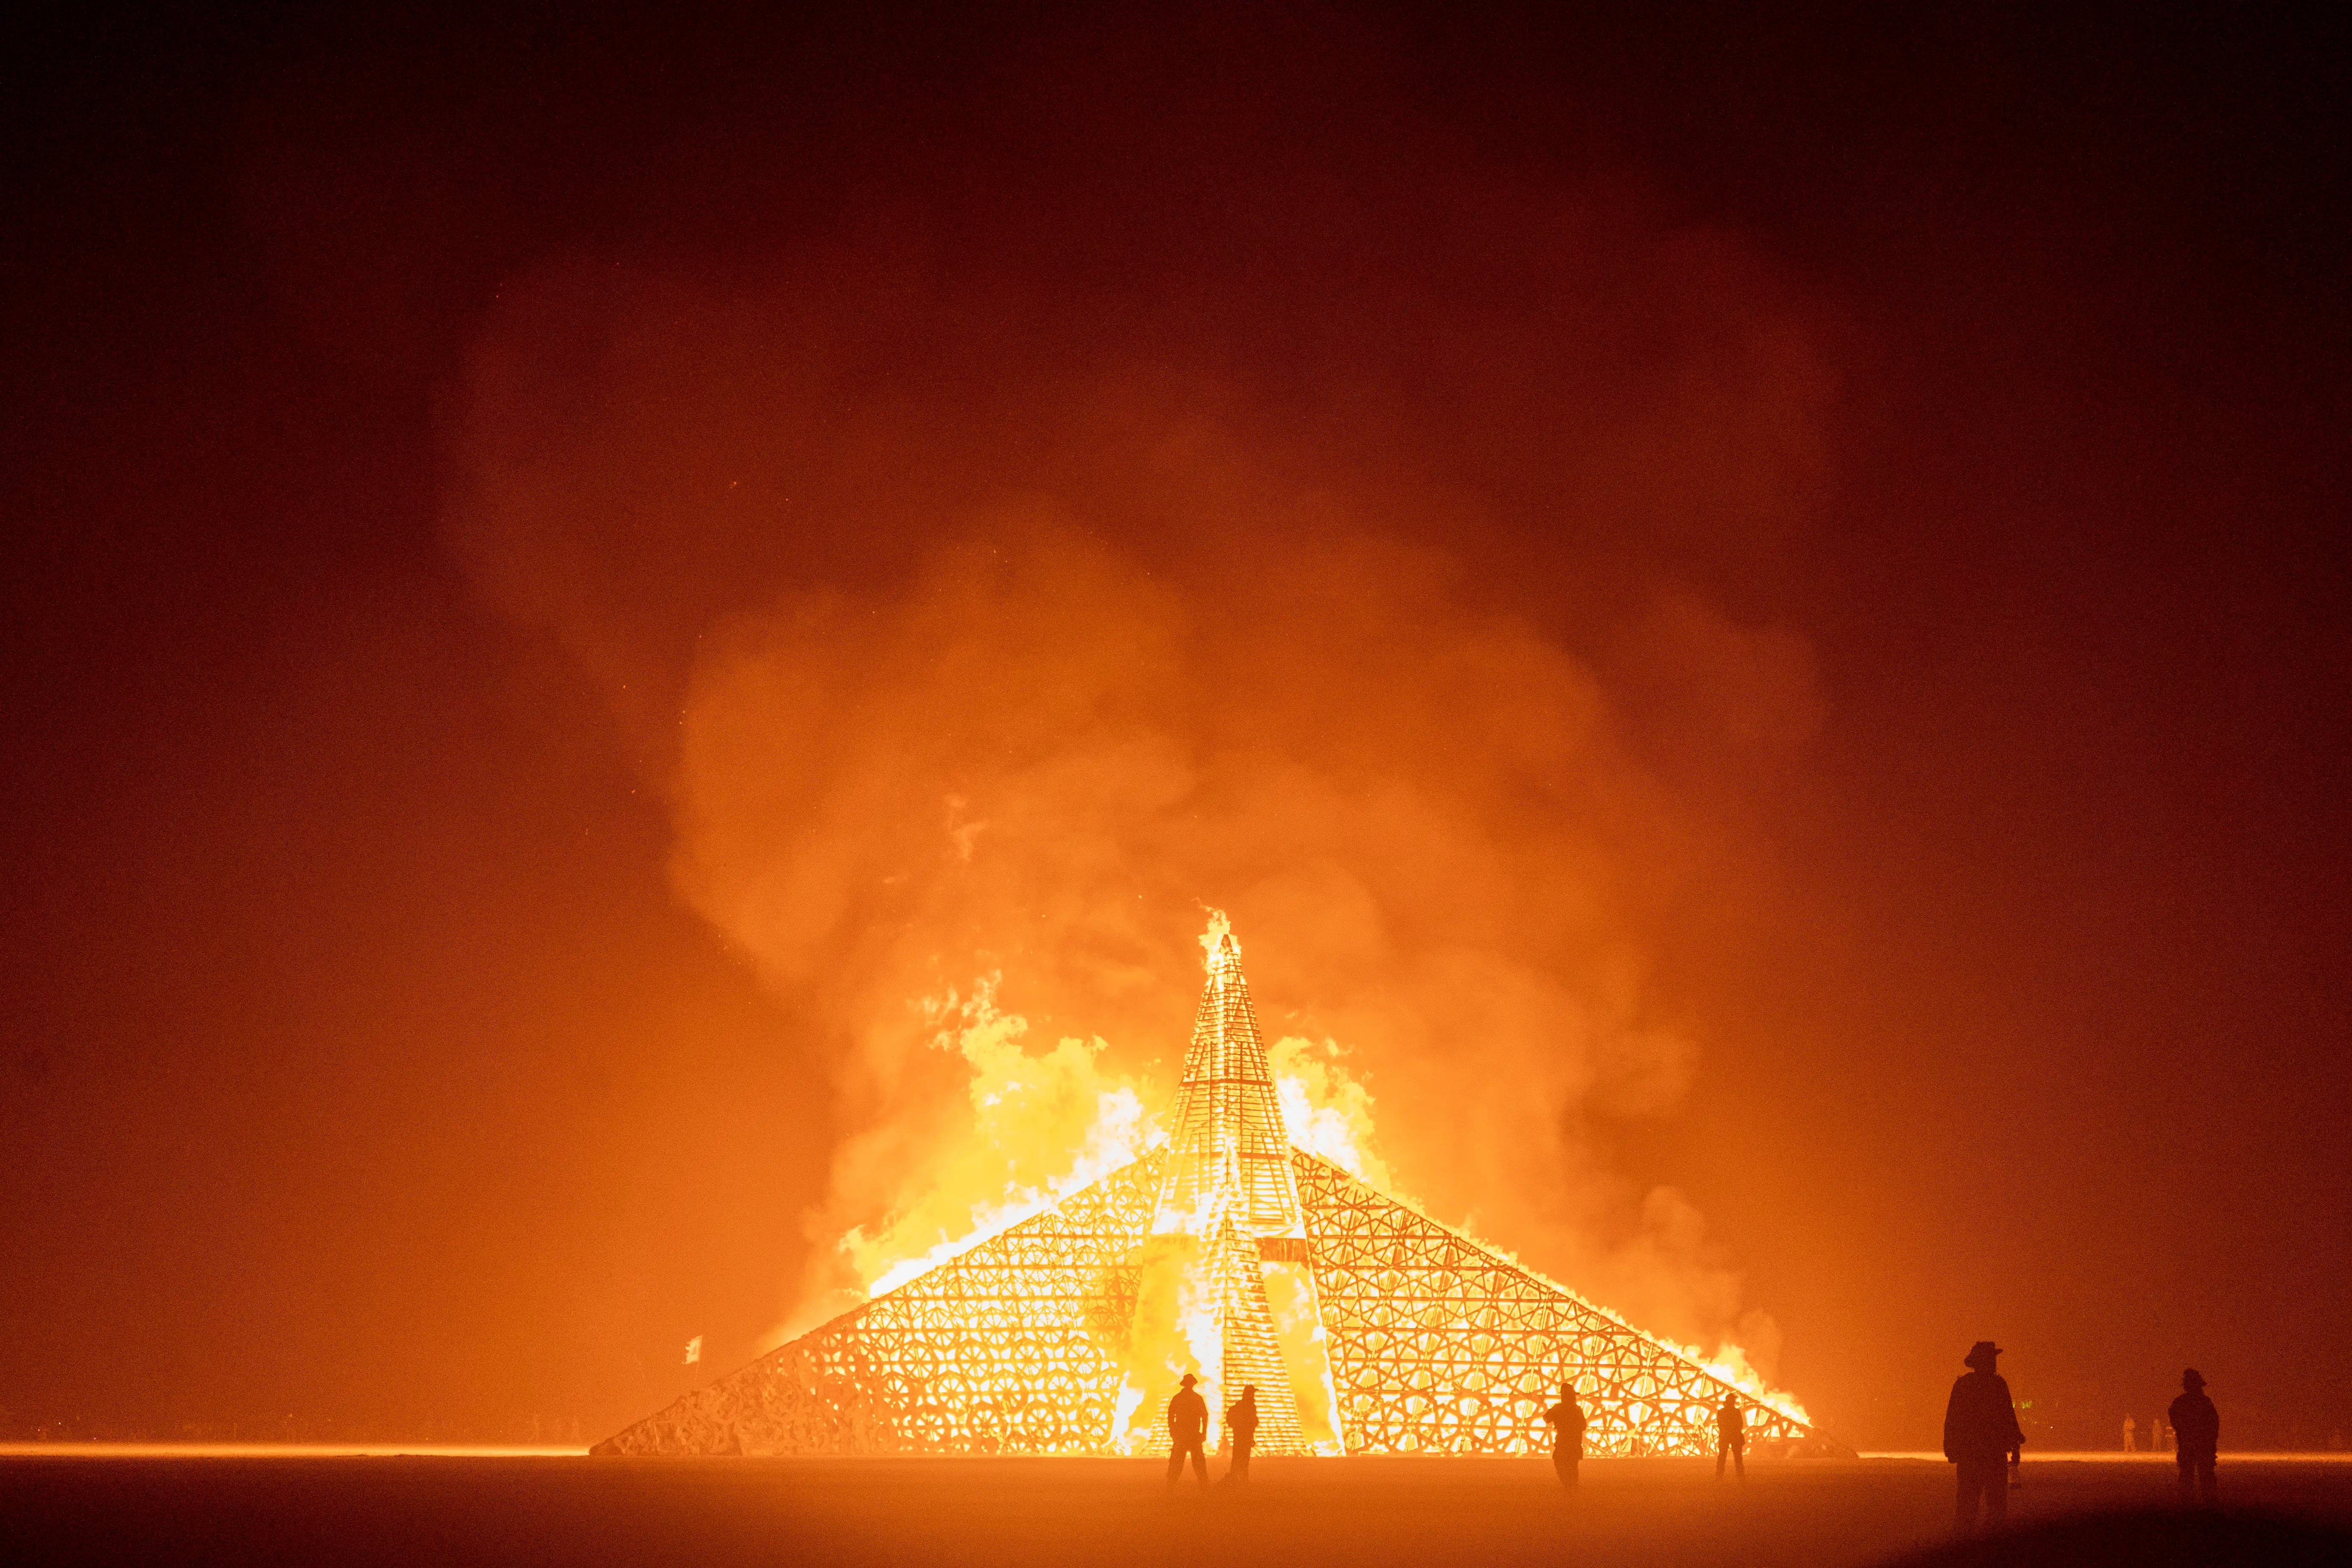 The Empyrean Temple on fire, entirely aflame. In the foreground you see silhouettes of fire safety volunteers, some in complete fireproof outfits, as the flames reach heights of 100 feet and smoke fills the sky.